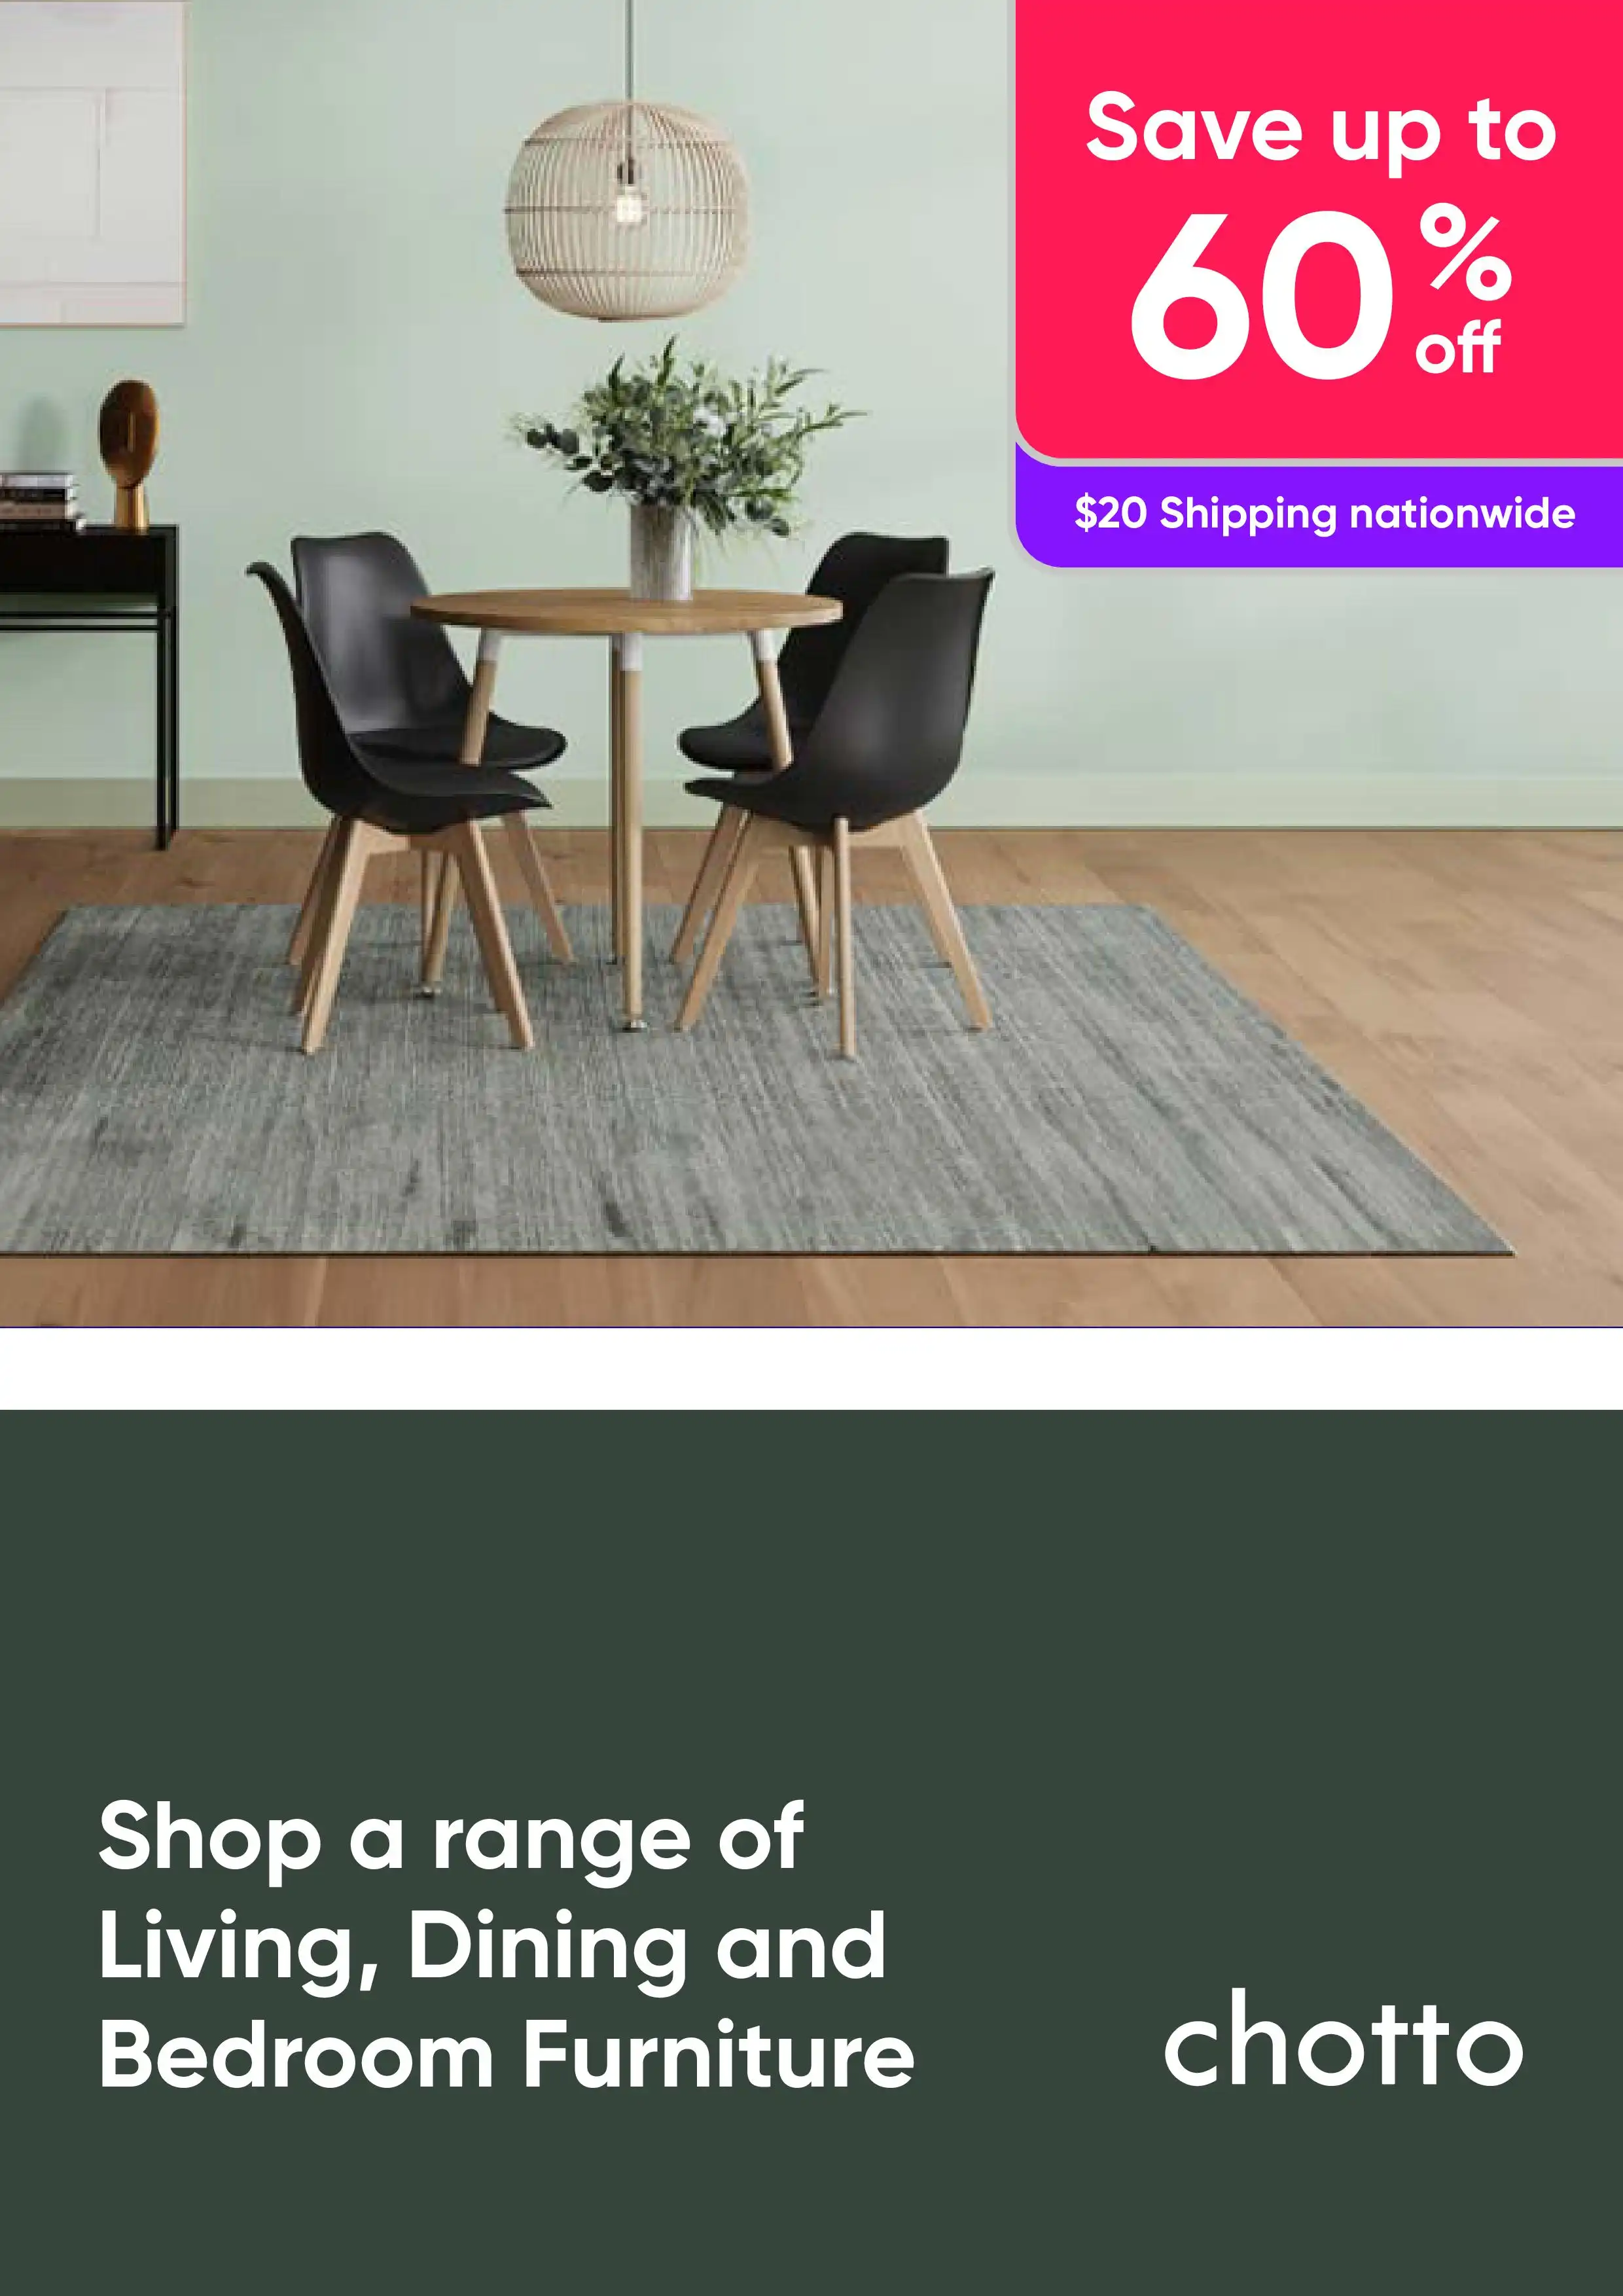 Furniture on Sale - Save Up to 60% Off RRP on a Range of Living, Dining and Bedroom Furniture